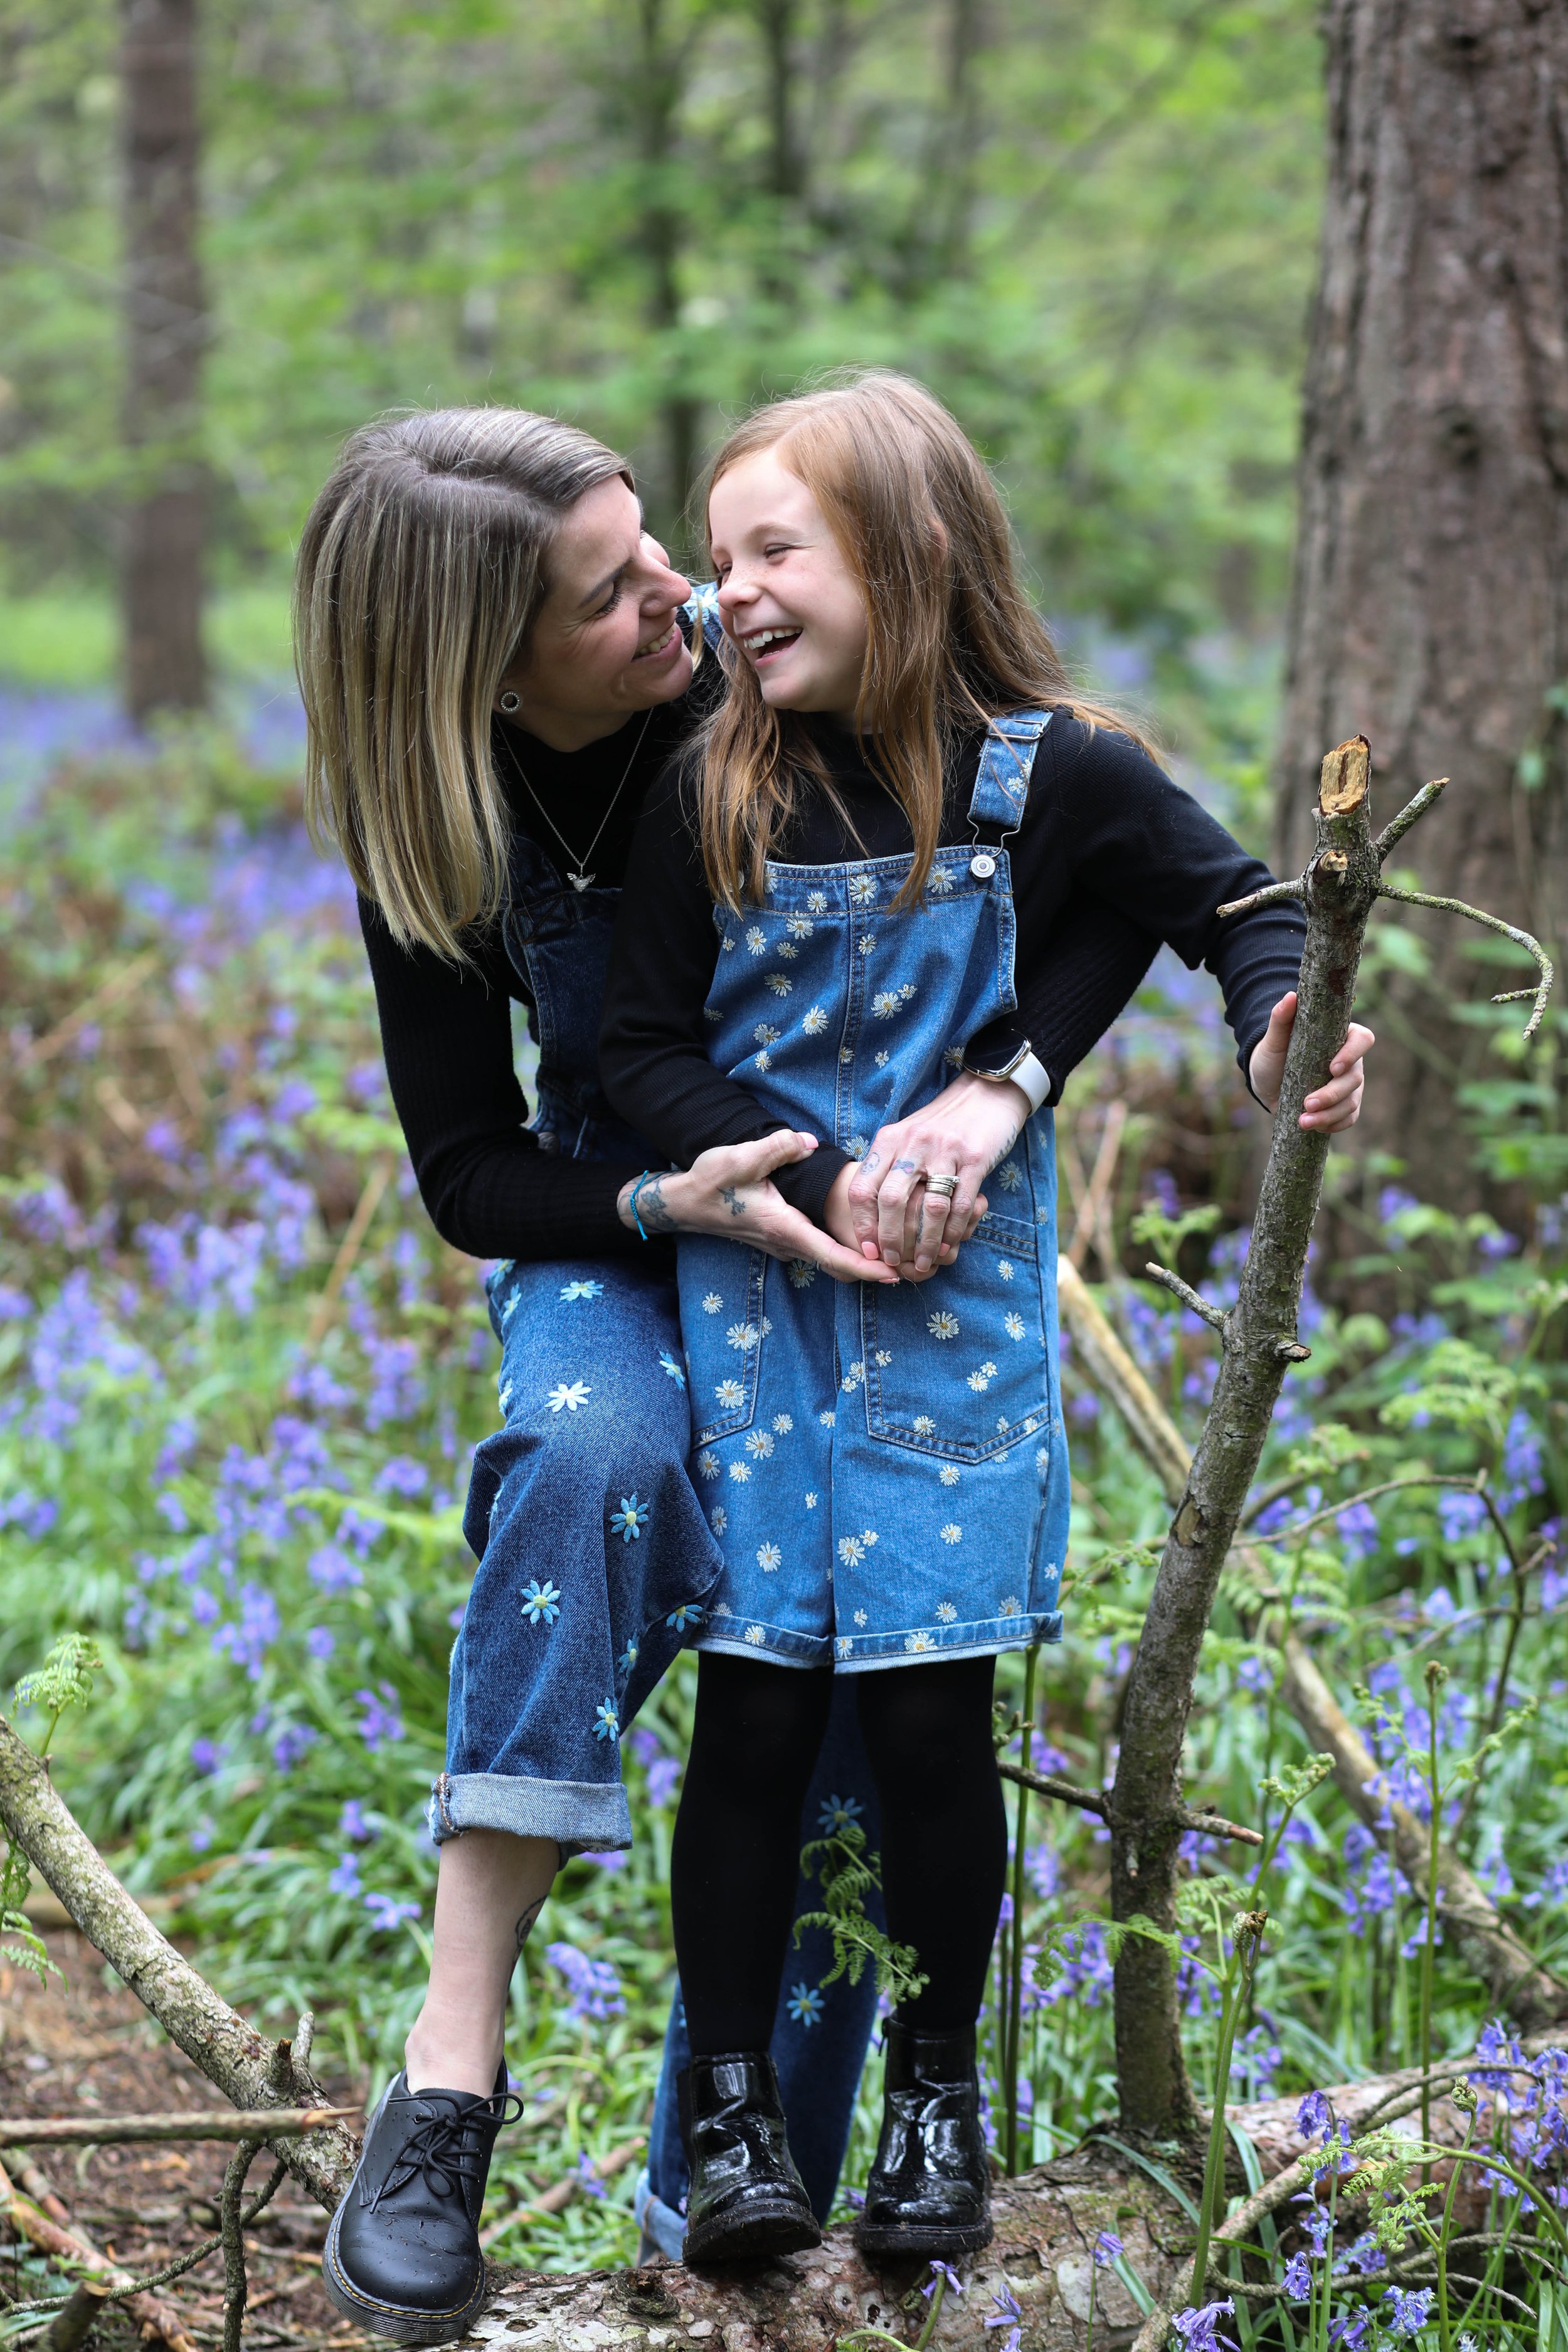 MUM AND DAUGHTER PHOTO SHOOT IN THE BLUEBELLS | BERKSHIRE PORTRAIT SHOOTS31 choice .JPG